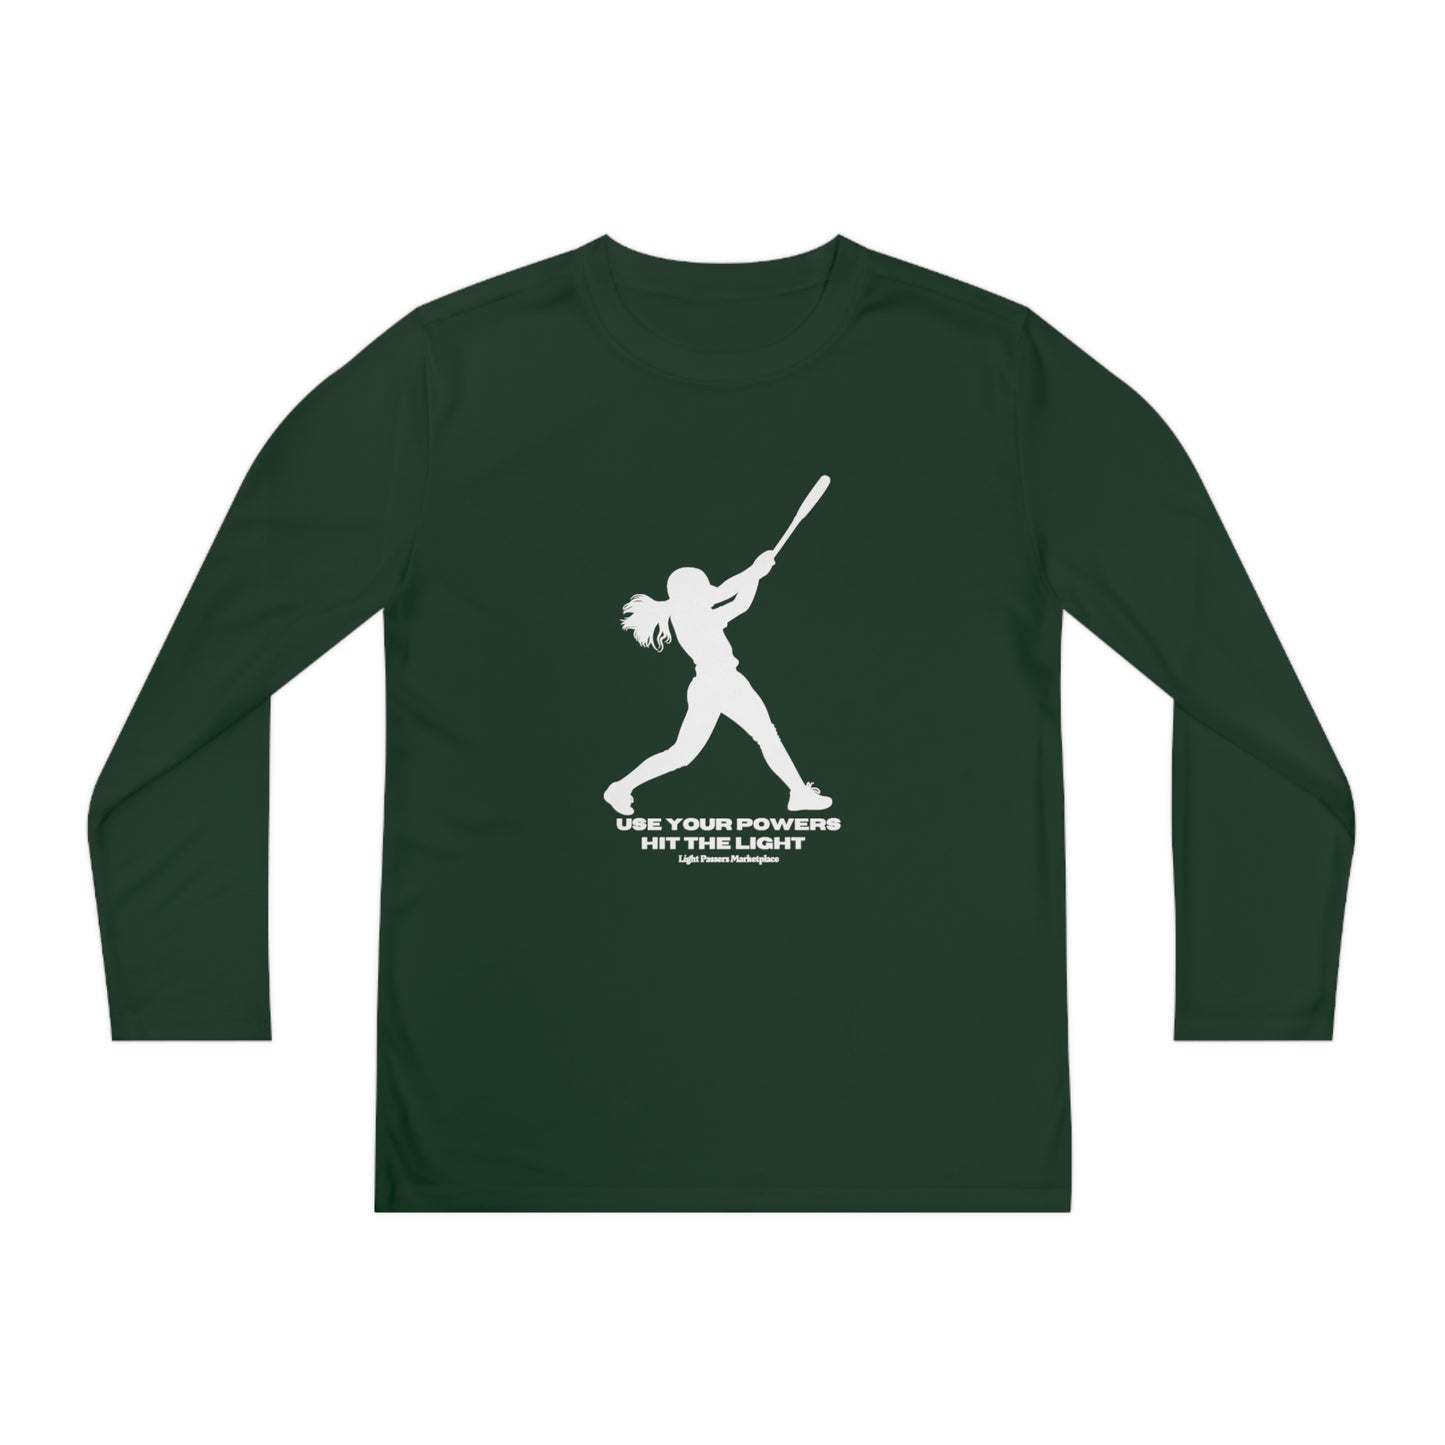 Youth long sleeve active shirt with a white silhouette of a girl swinging a bat, made of 100% moisture-wicking polyester for comfort and style.